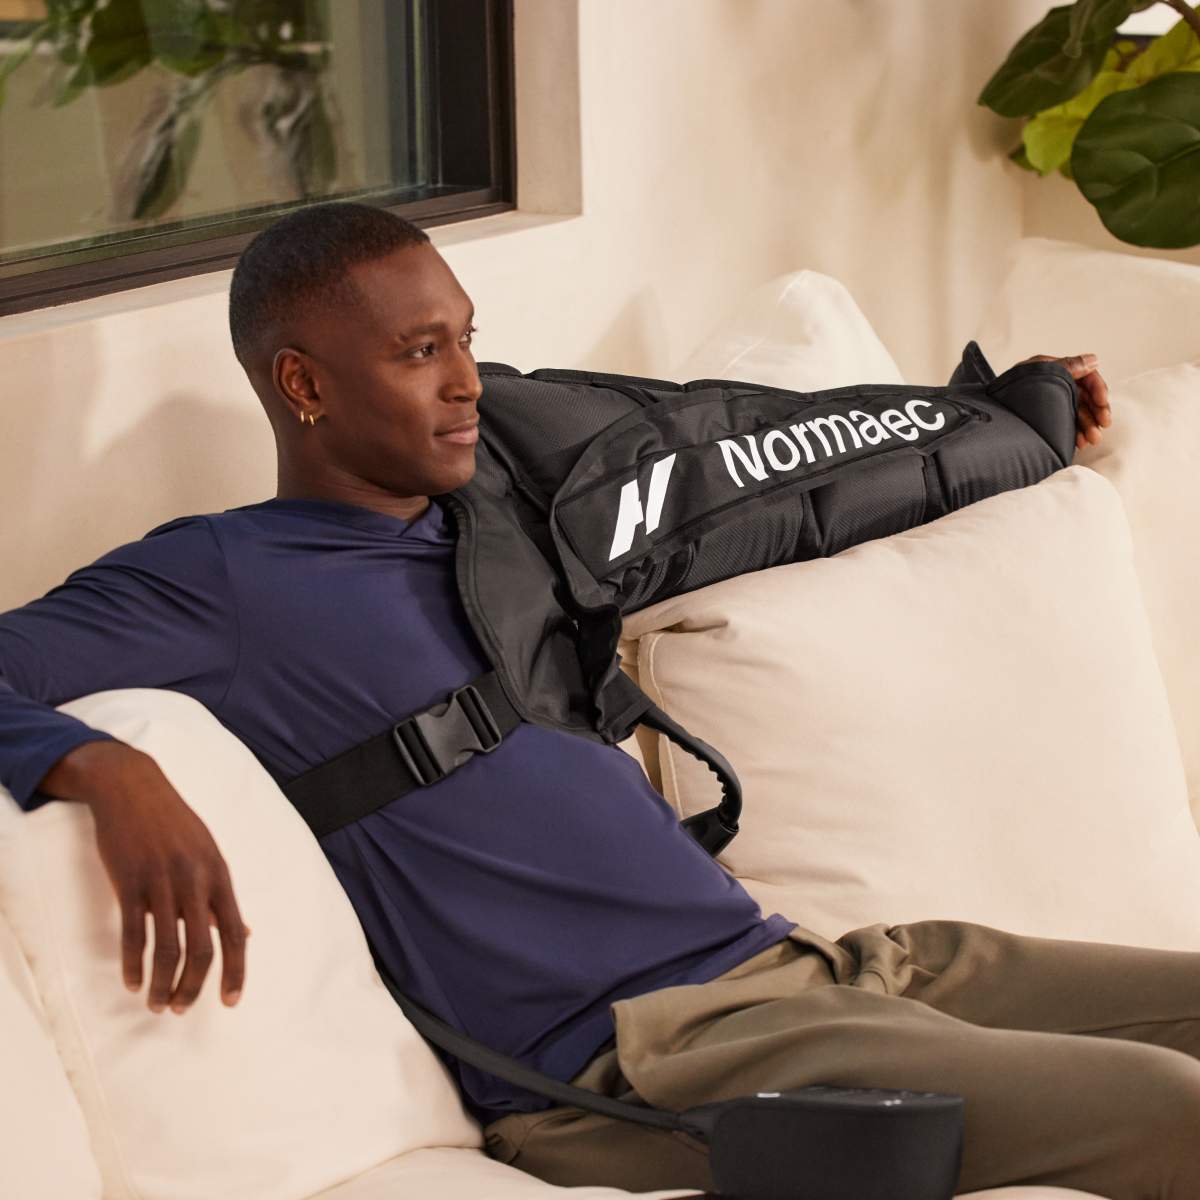 Normatec 3 Full Body Recovery System